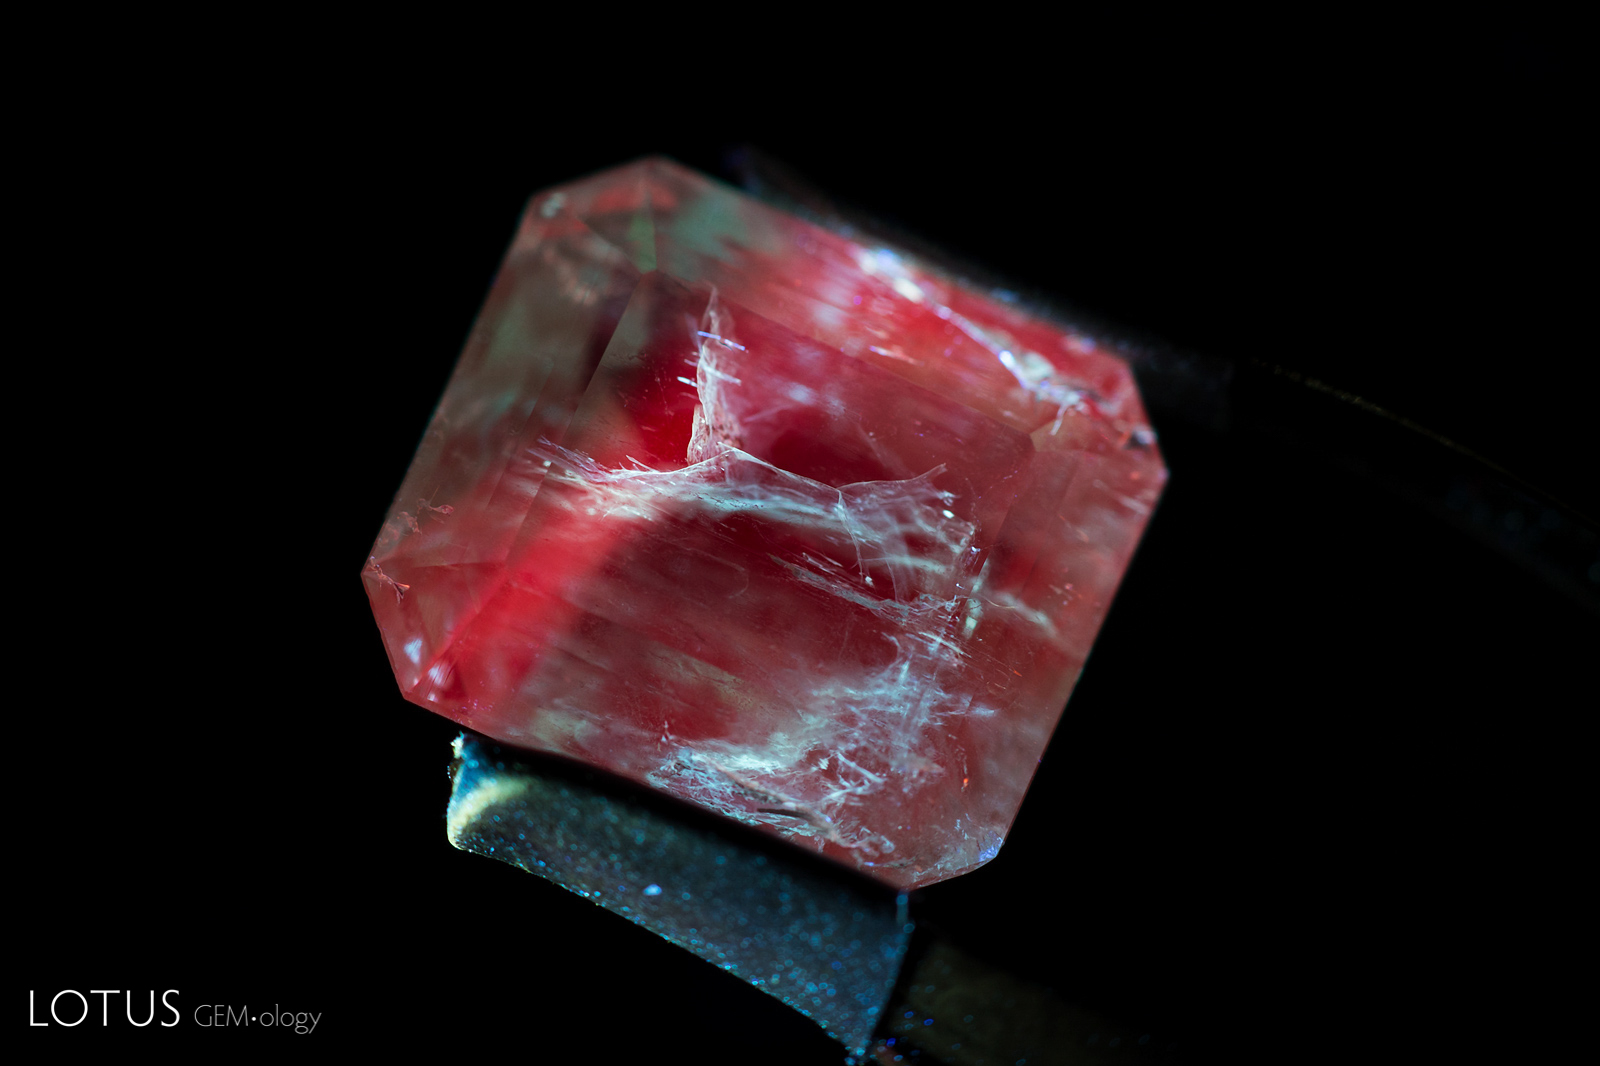 Figure 2. When viewed with the Covoy S2+ torch, this Colombian emerald displays a red fluorescence. However, the fissures display a chalky blue reaction because the filler in the fissures is fluorescing as well. Photo: E. Billie Hughes/ Lotus Gemology